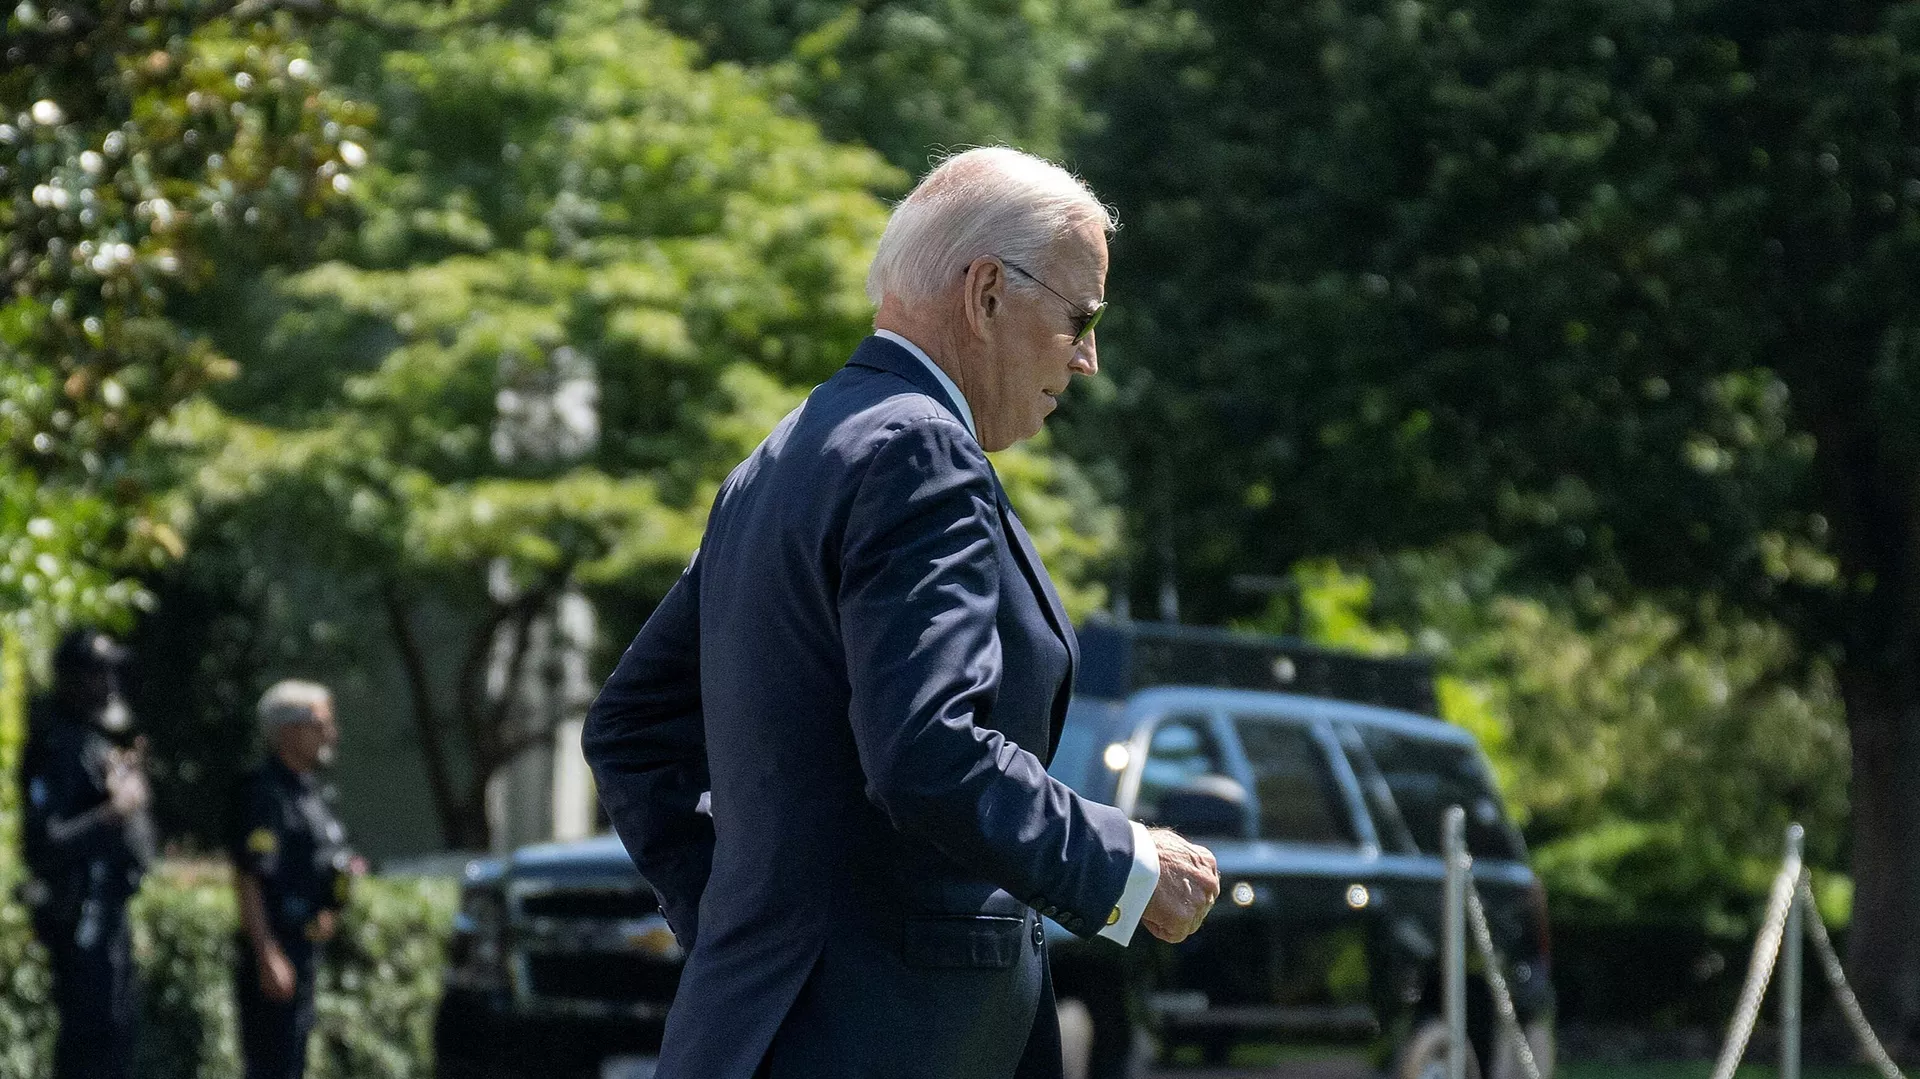 5th Circuit Find Biden Administration, and Other Officials Possibly Violated First Amendment